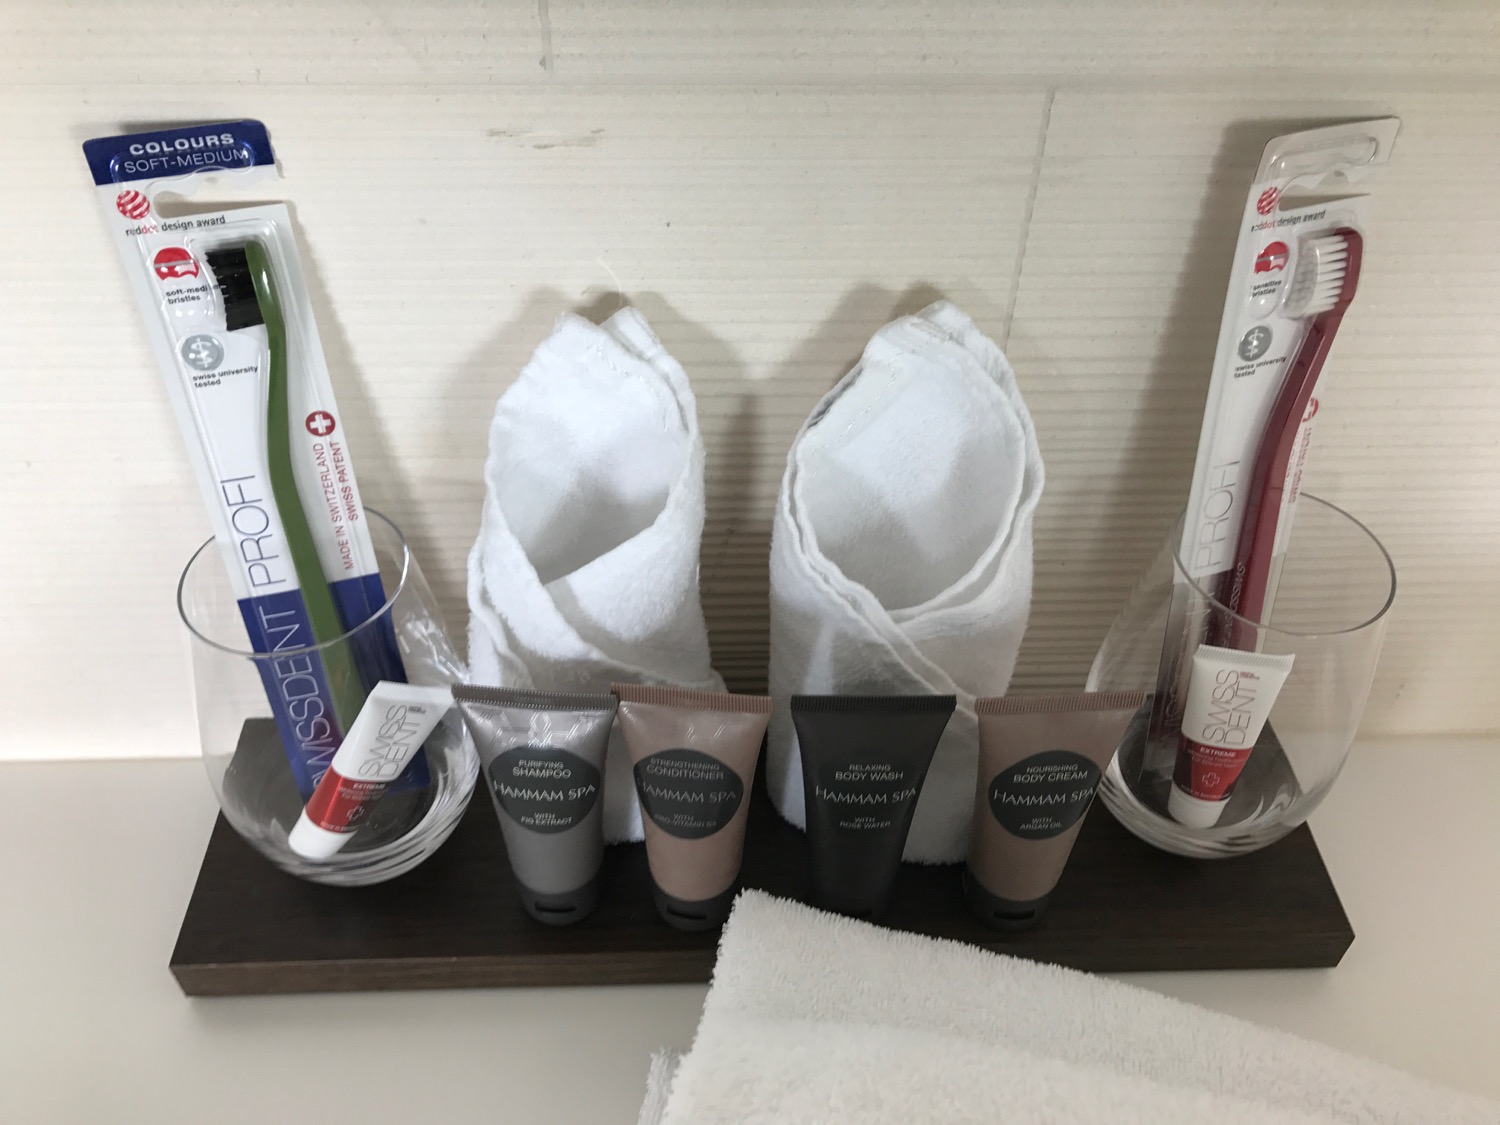 a group of toothbrushes and toothpaste on a shelf